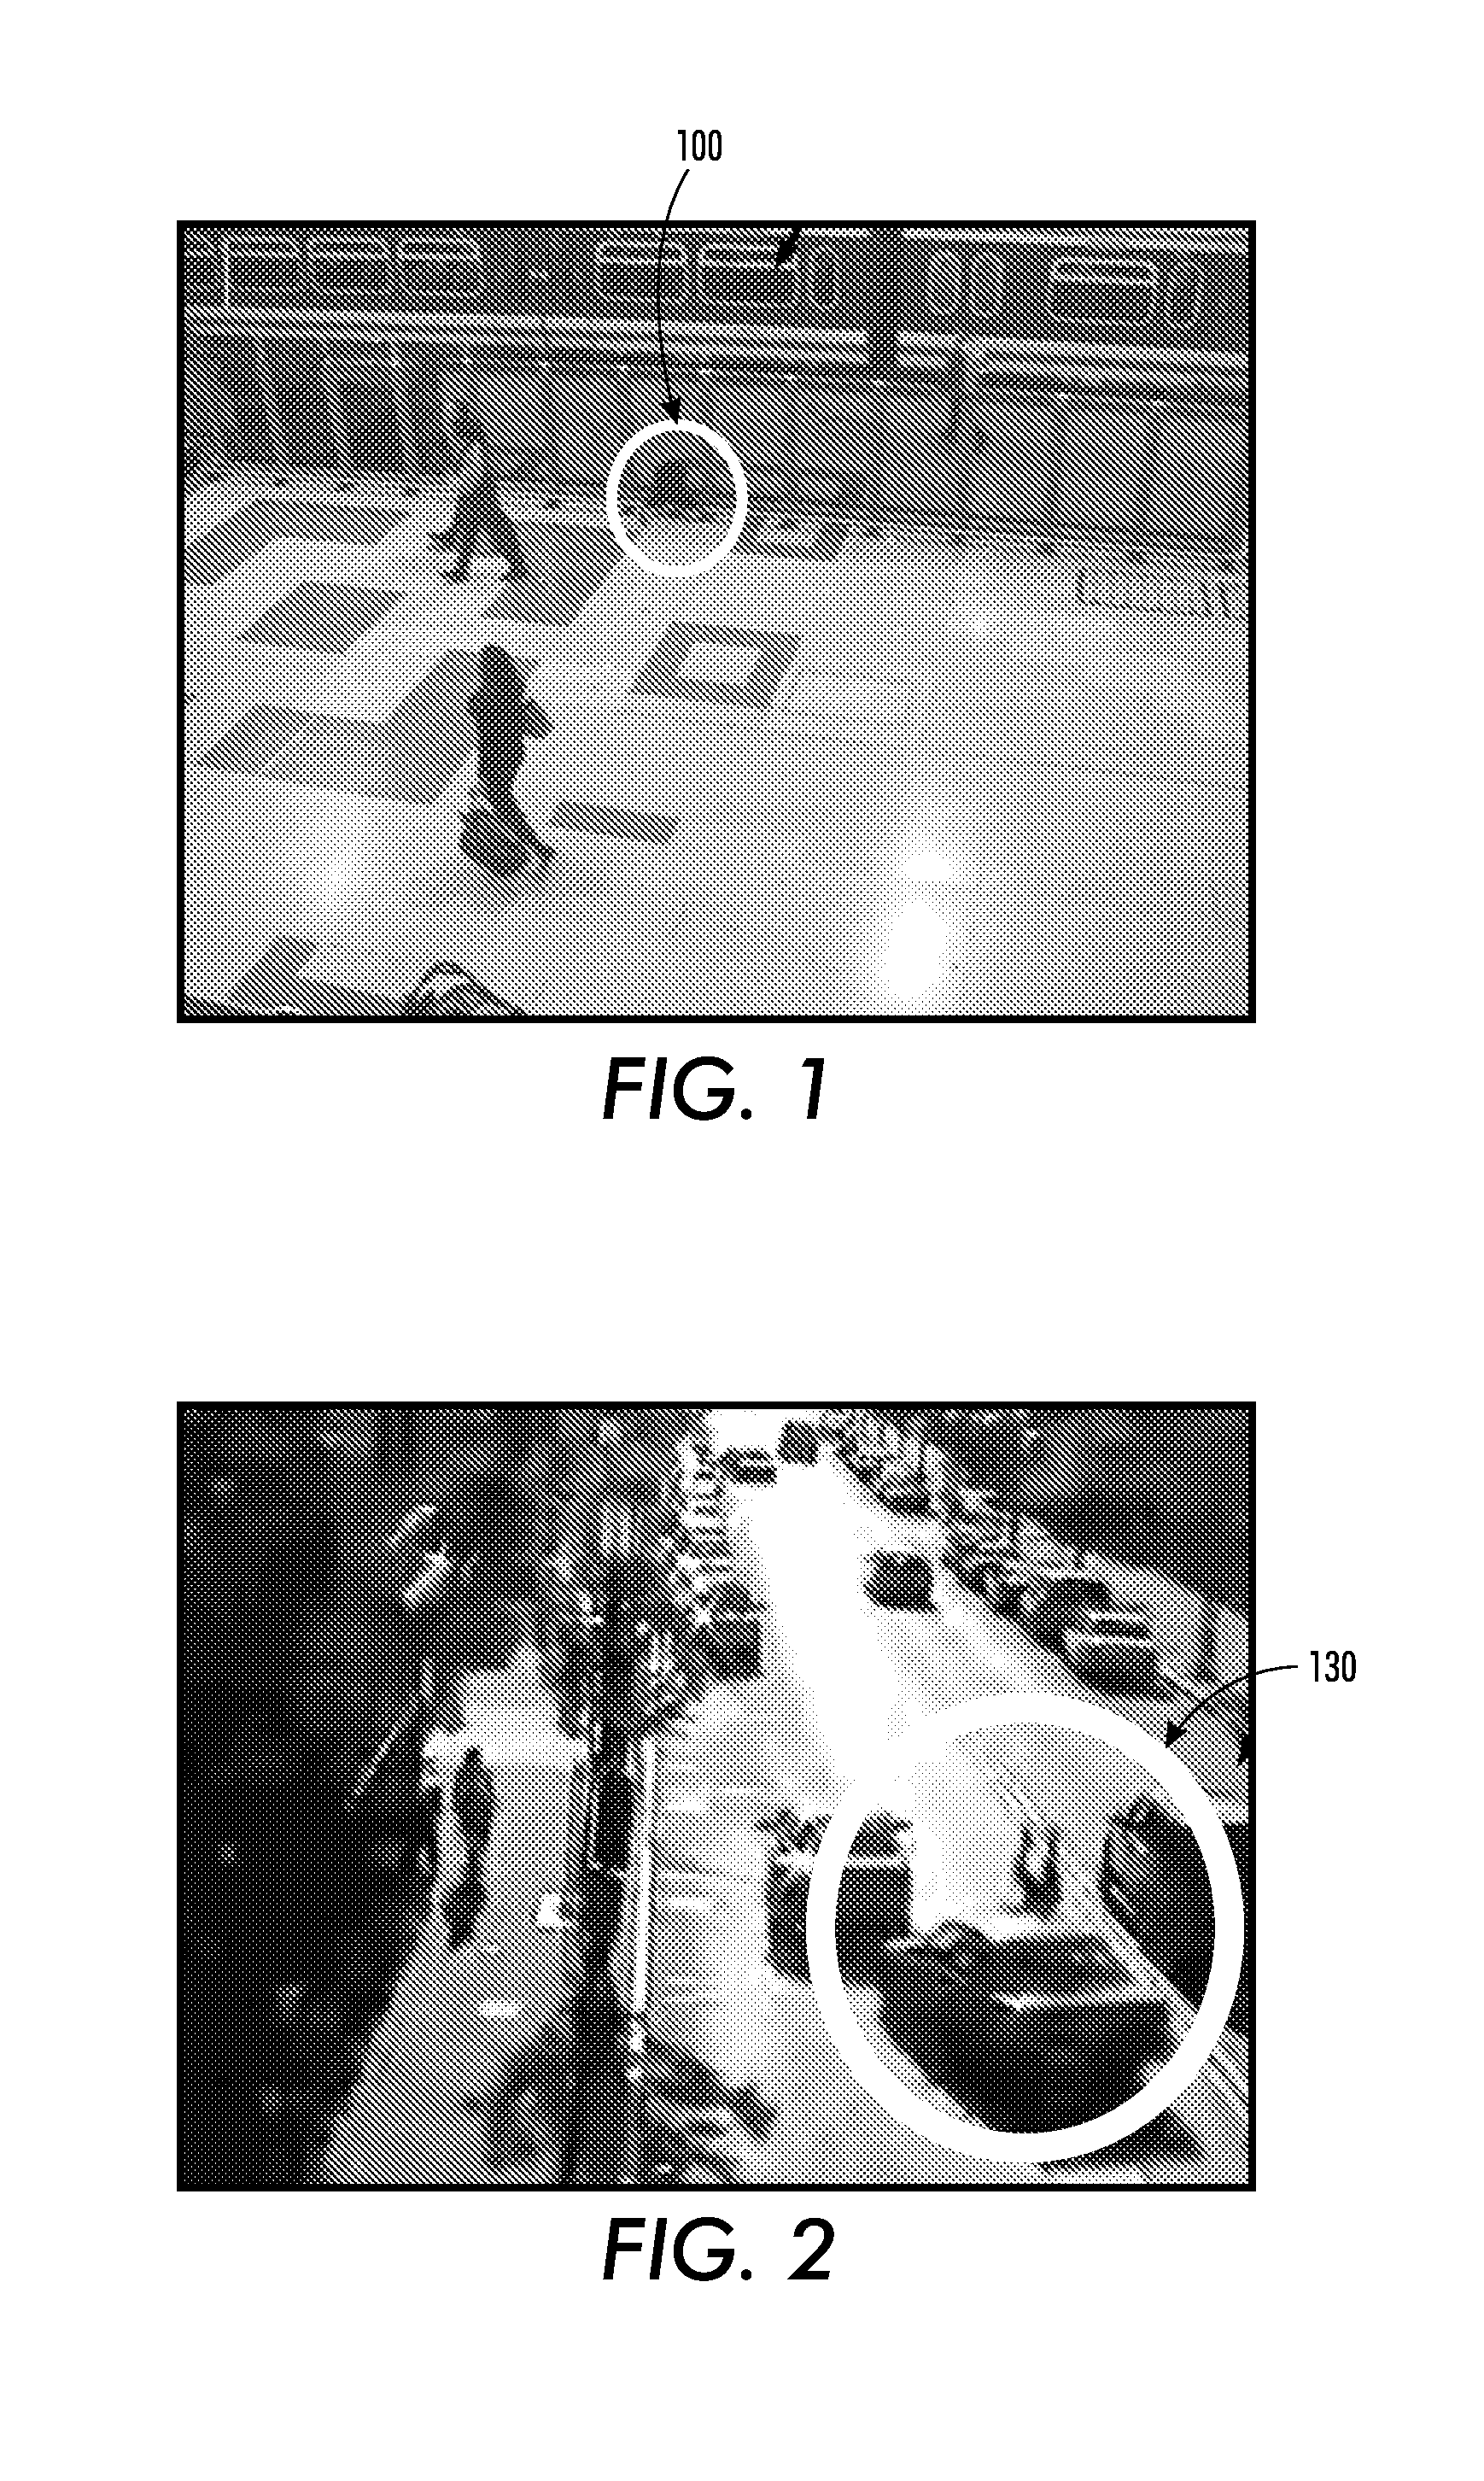 Method and system for automatically detecting anomalies at a traffic intersection